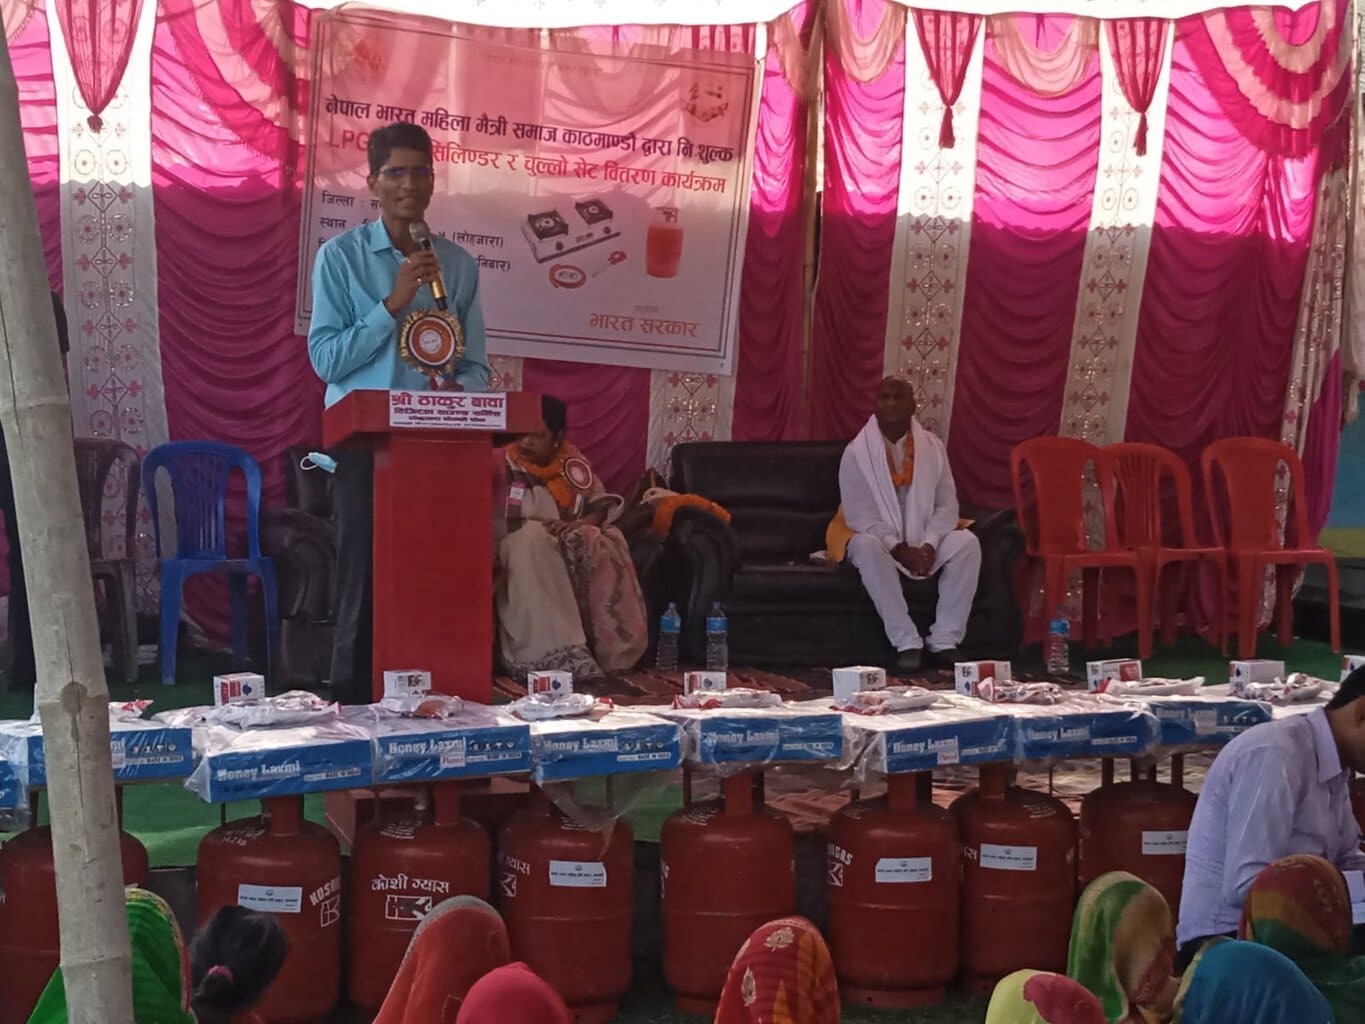 india hands over lpg gas stoves cylinders to underprivileged families in nepal – The News Mill